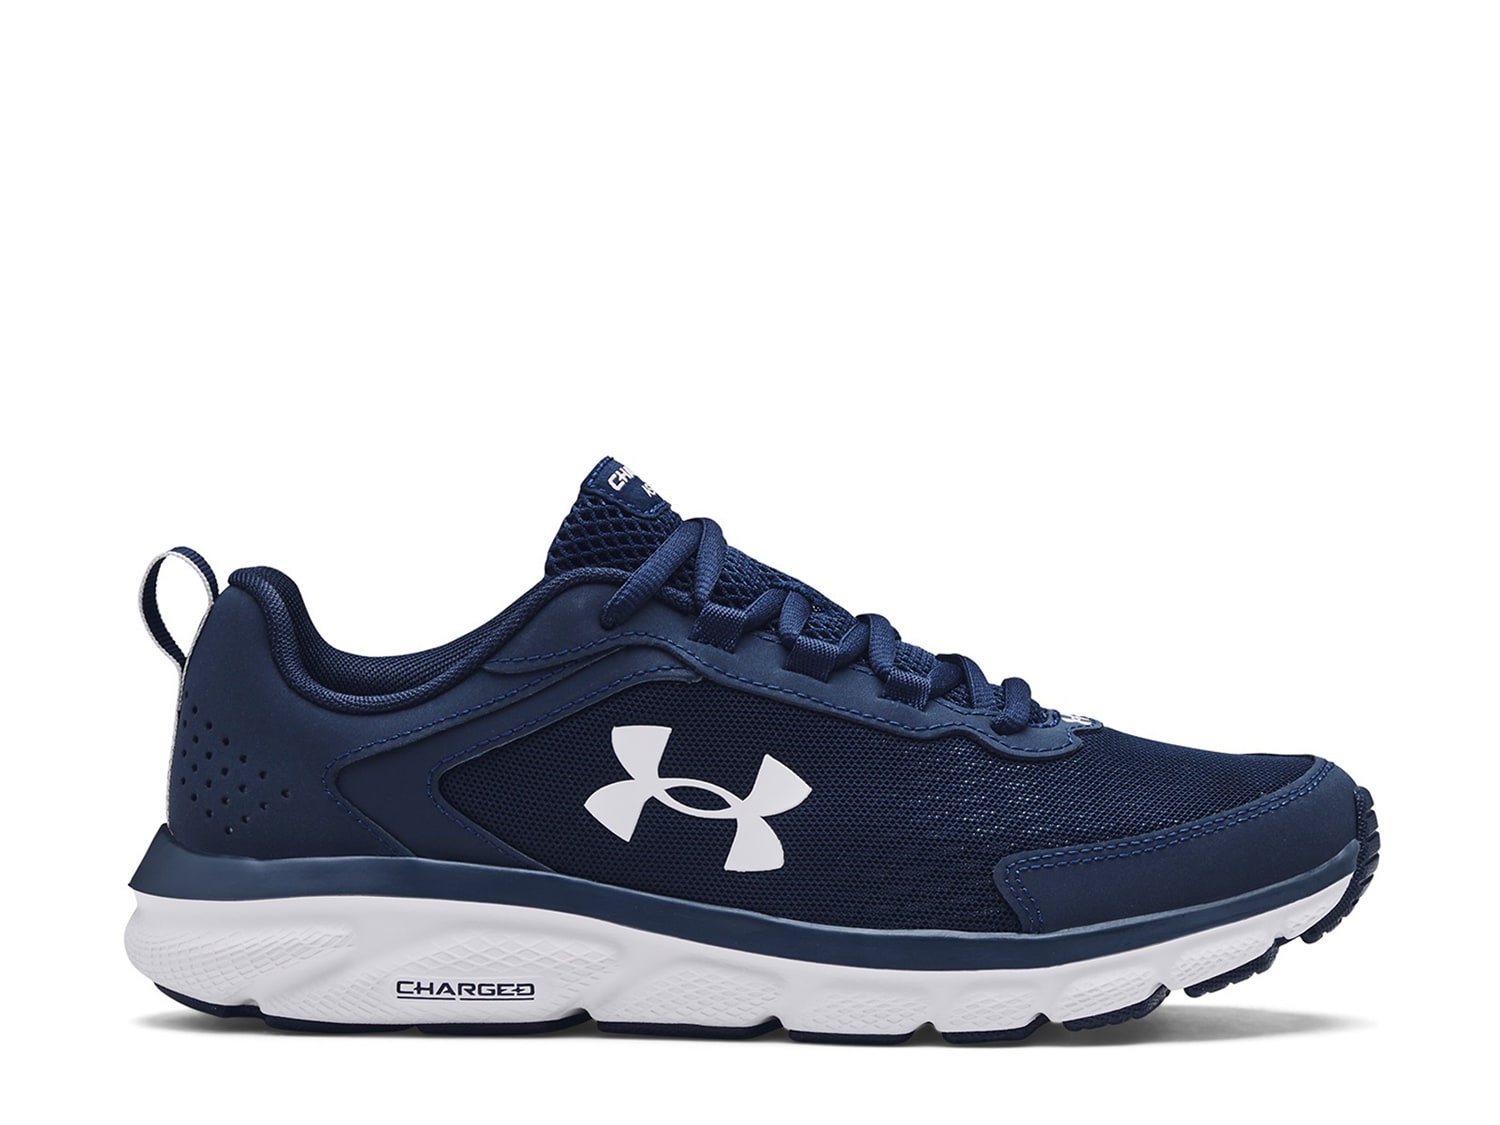 Under Armour Charged Assert 9 Running Shoe - Men's - Free Shipping | DSW